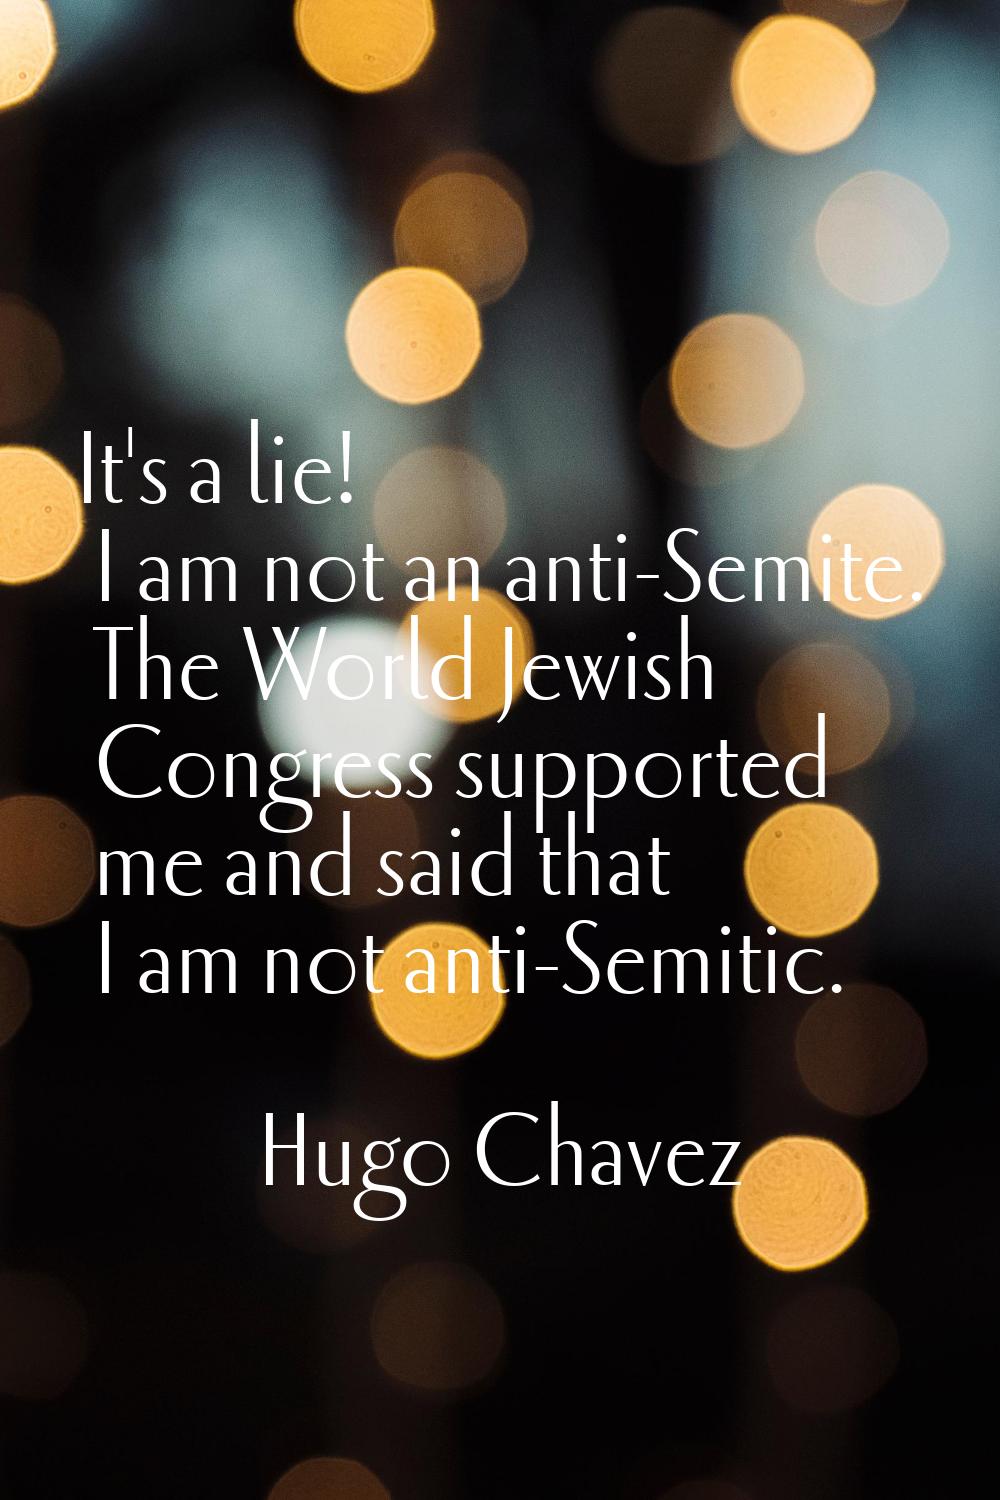 It's a lie! I am not an anti-Semite. The World Jewish Congress supported me and said that I am not 